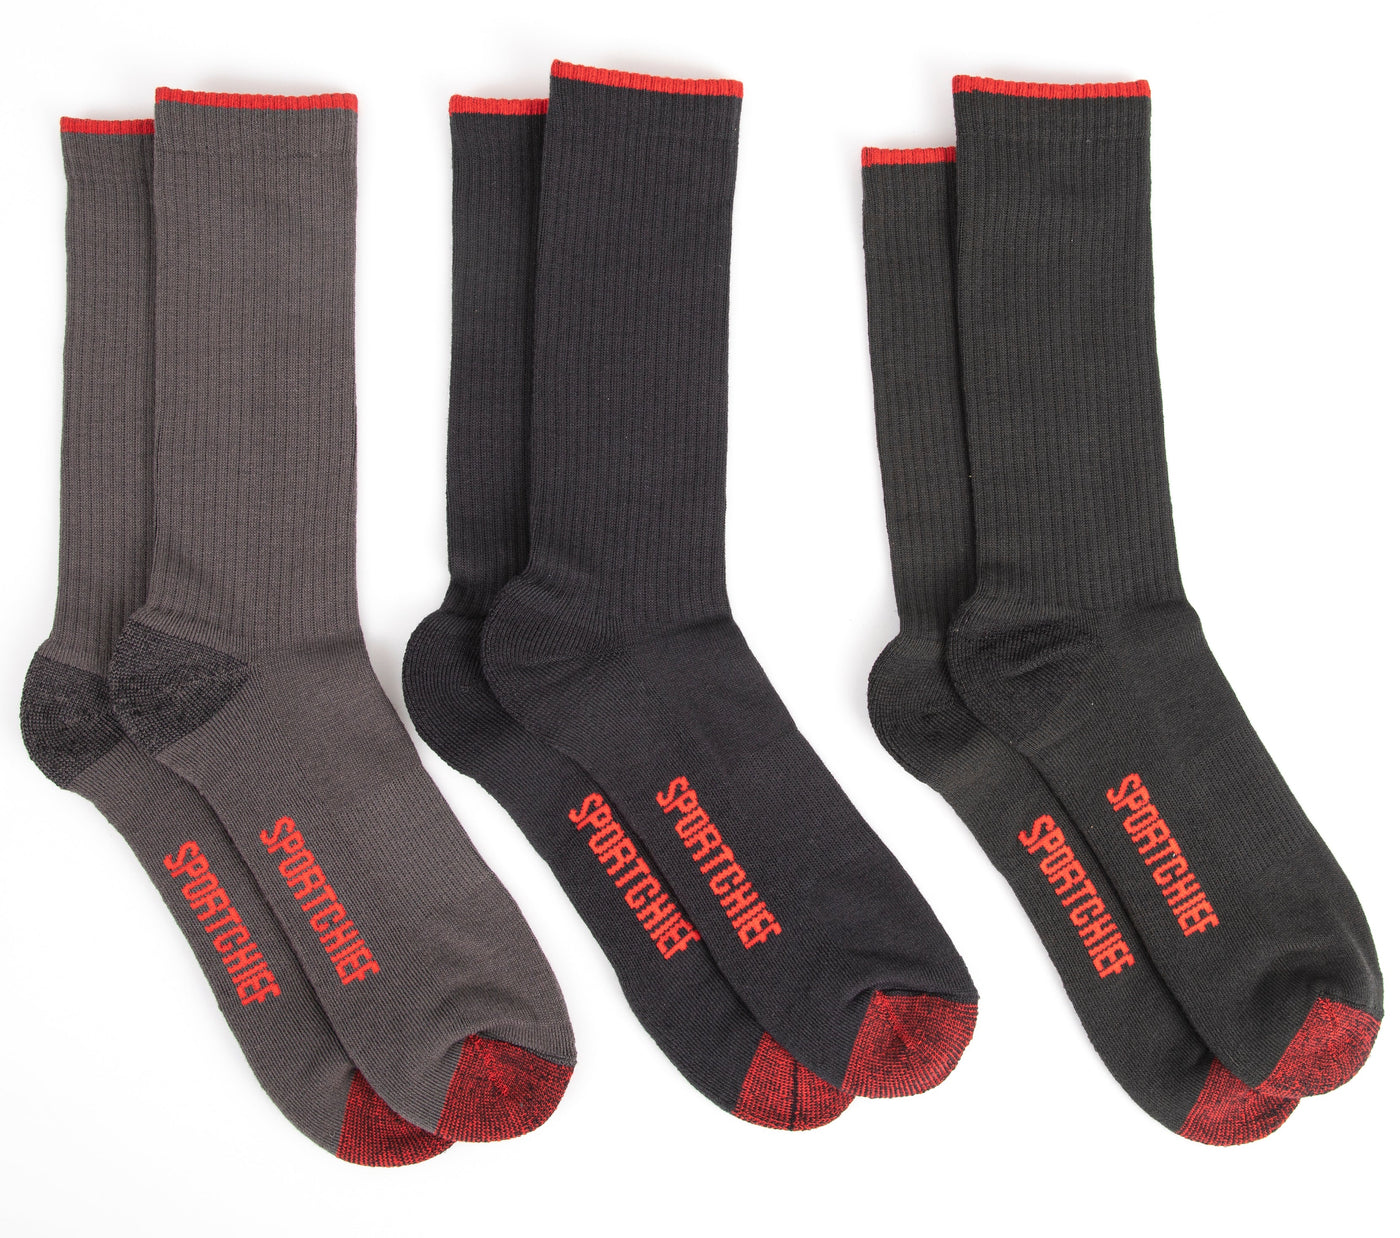 Bas polyvalents (3 paires) "Alpha" hommes  - Sportchief